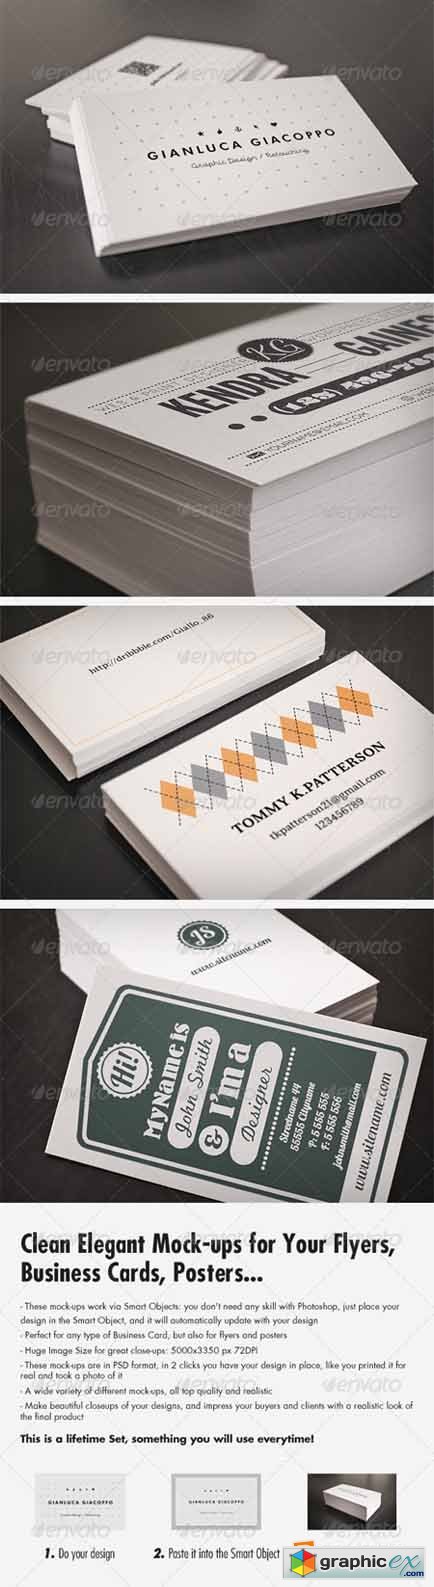 Flyer and Business Card Clean Realistic Mockups 3301941